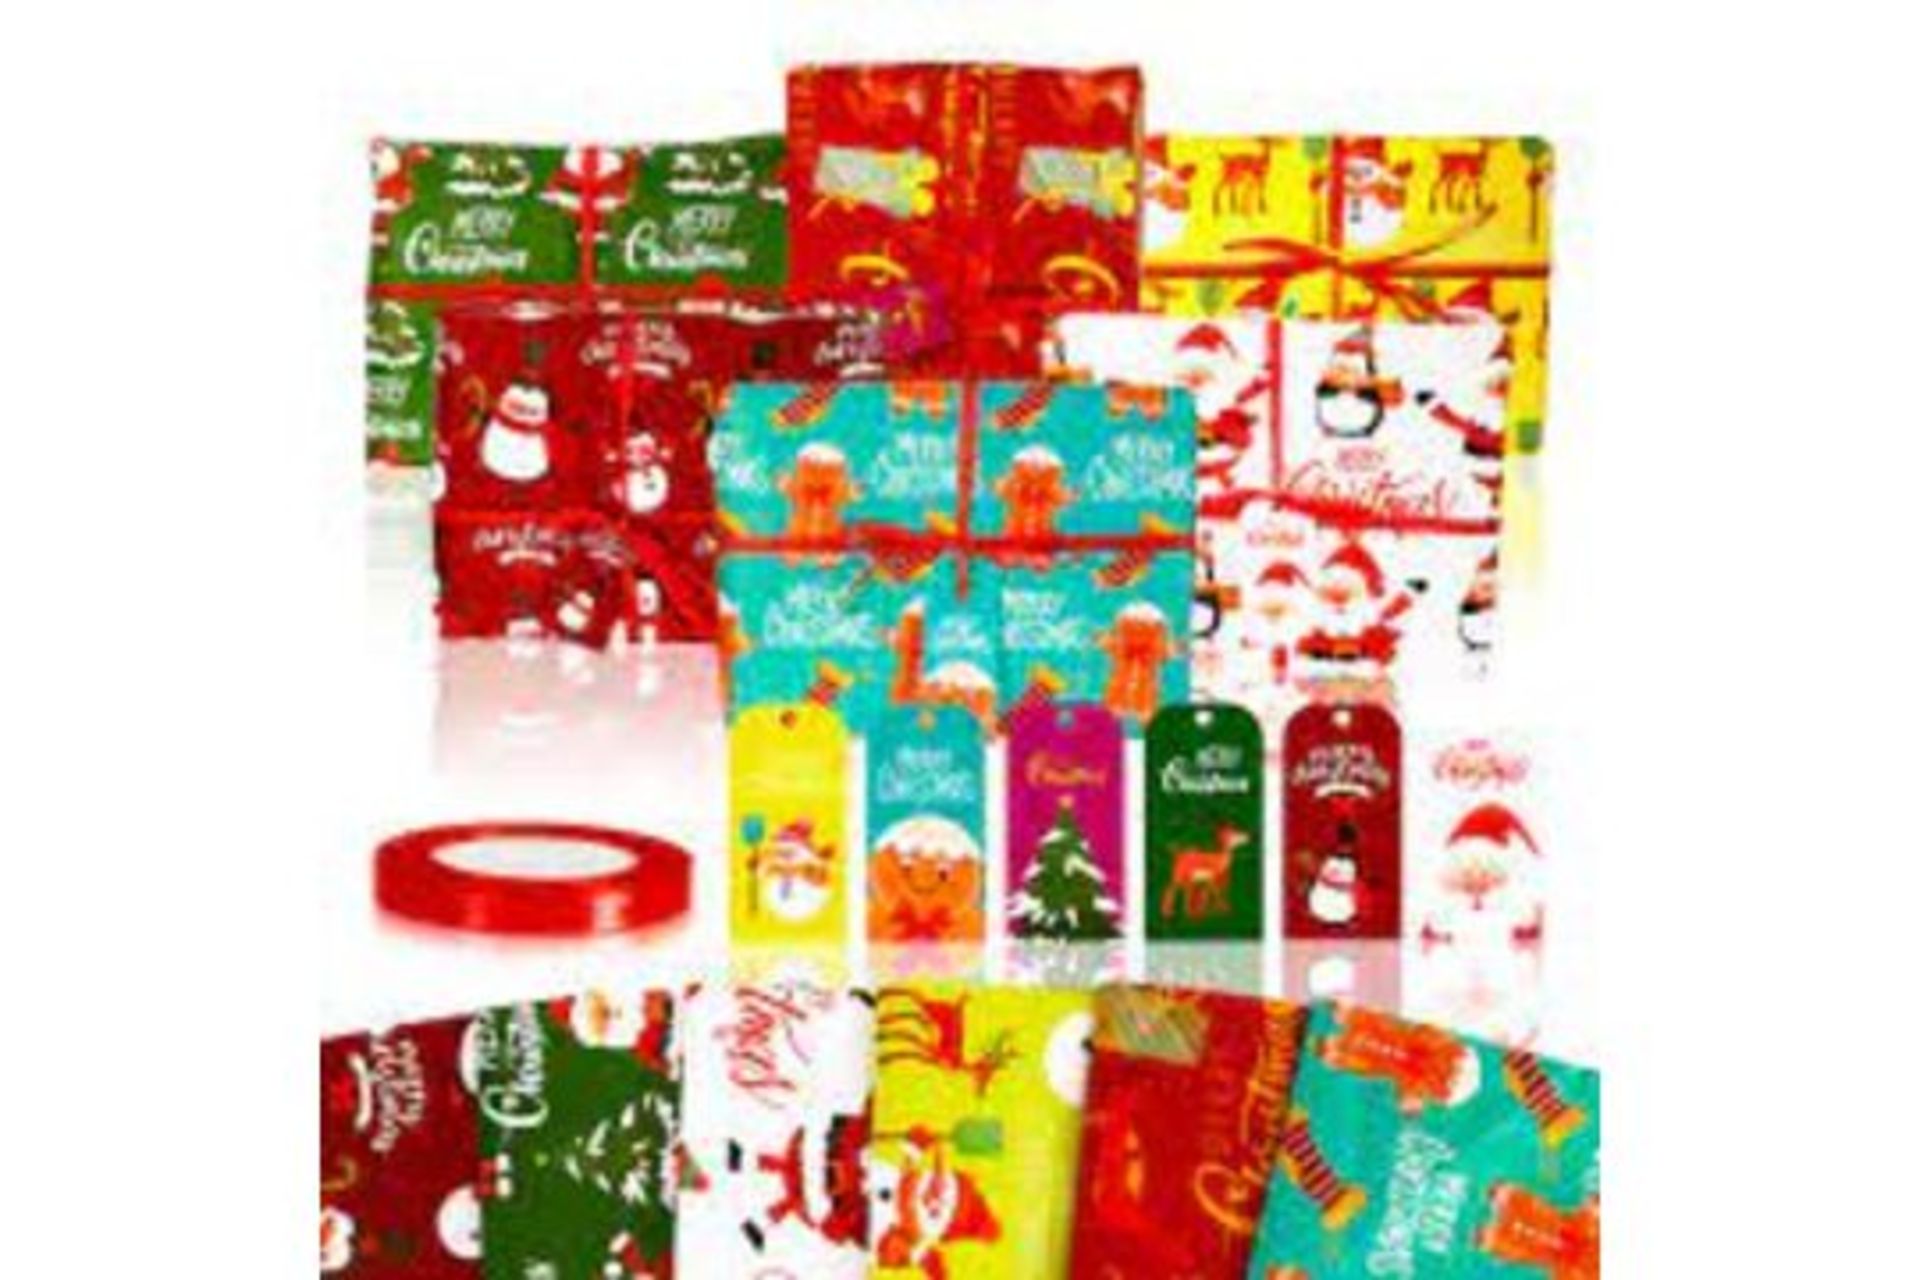 TRADE LOT 60 X BRAND NEW ASSORTED SETS OF 6 FOLDED SHEETS LUXURY CHRISTMAS WRAPPING PAPER SETS IN - Image 4 of 4